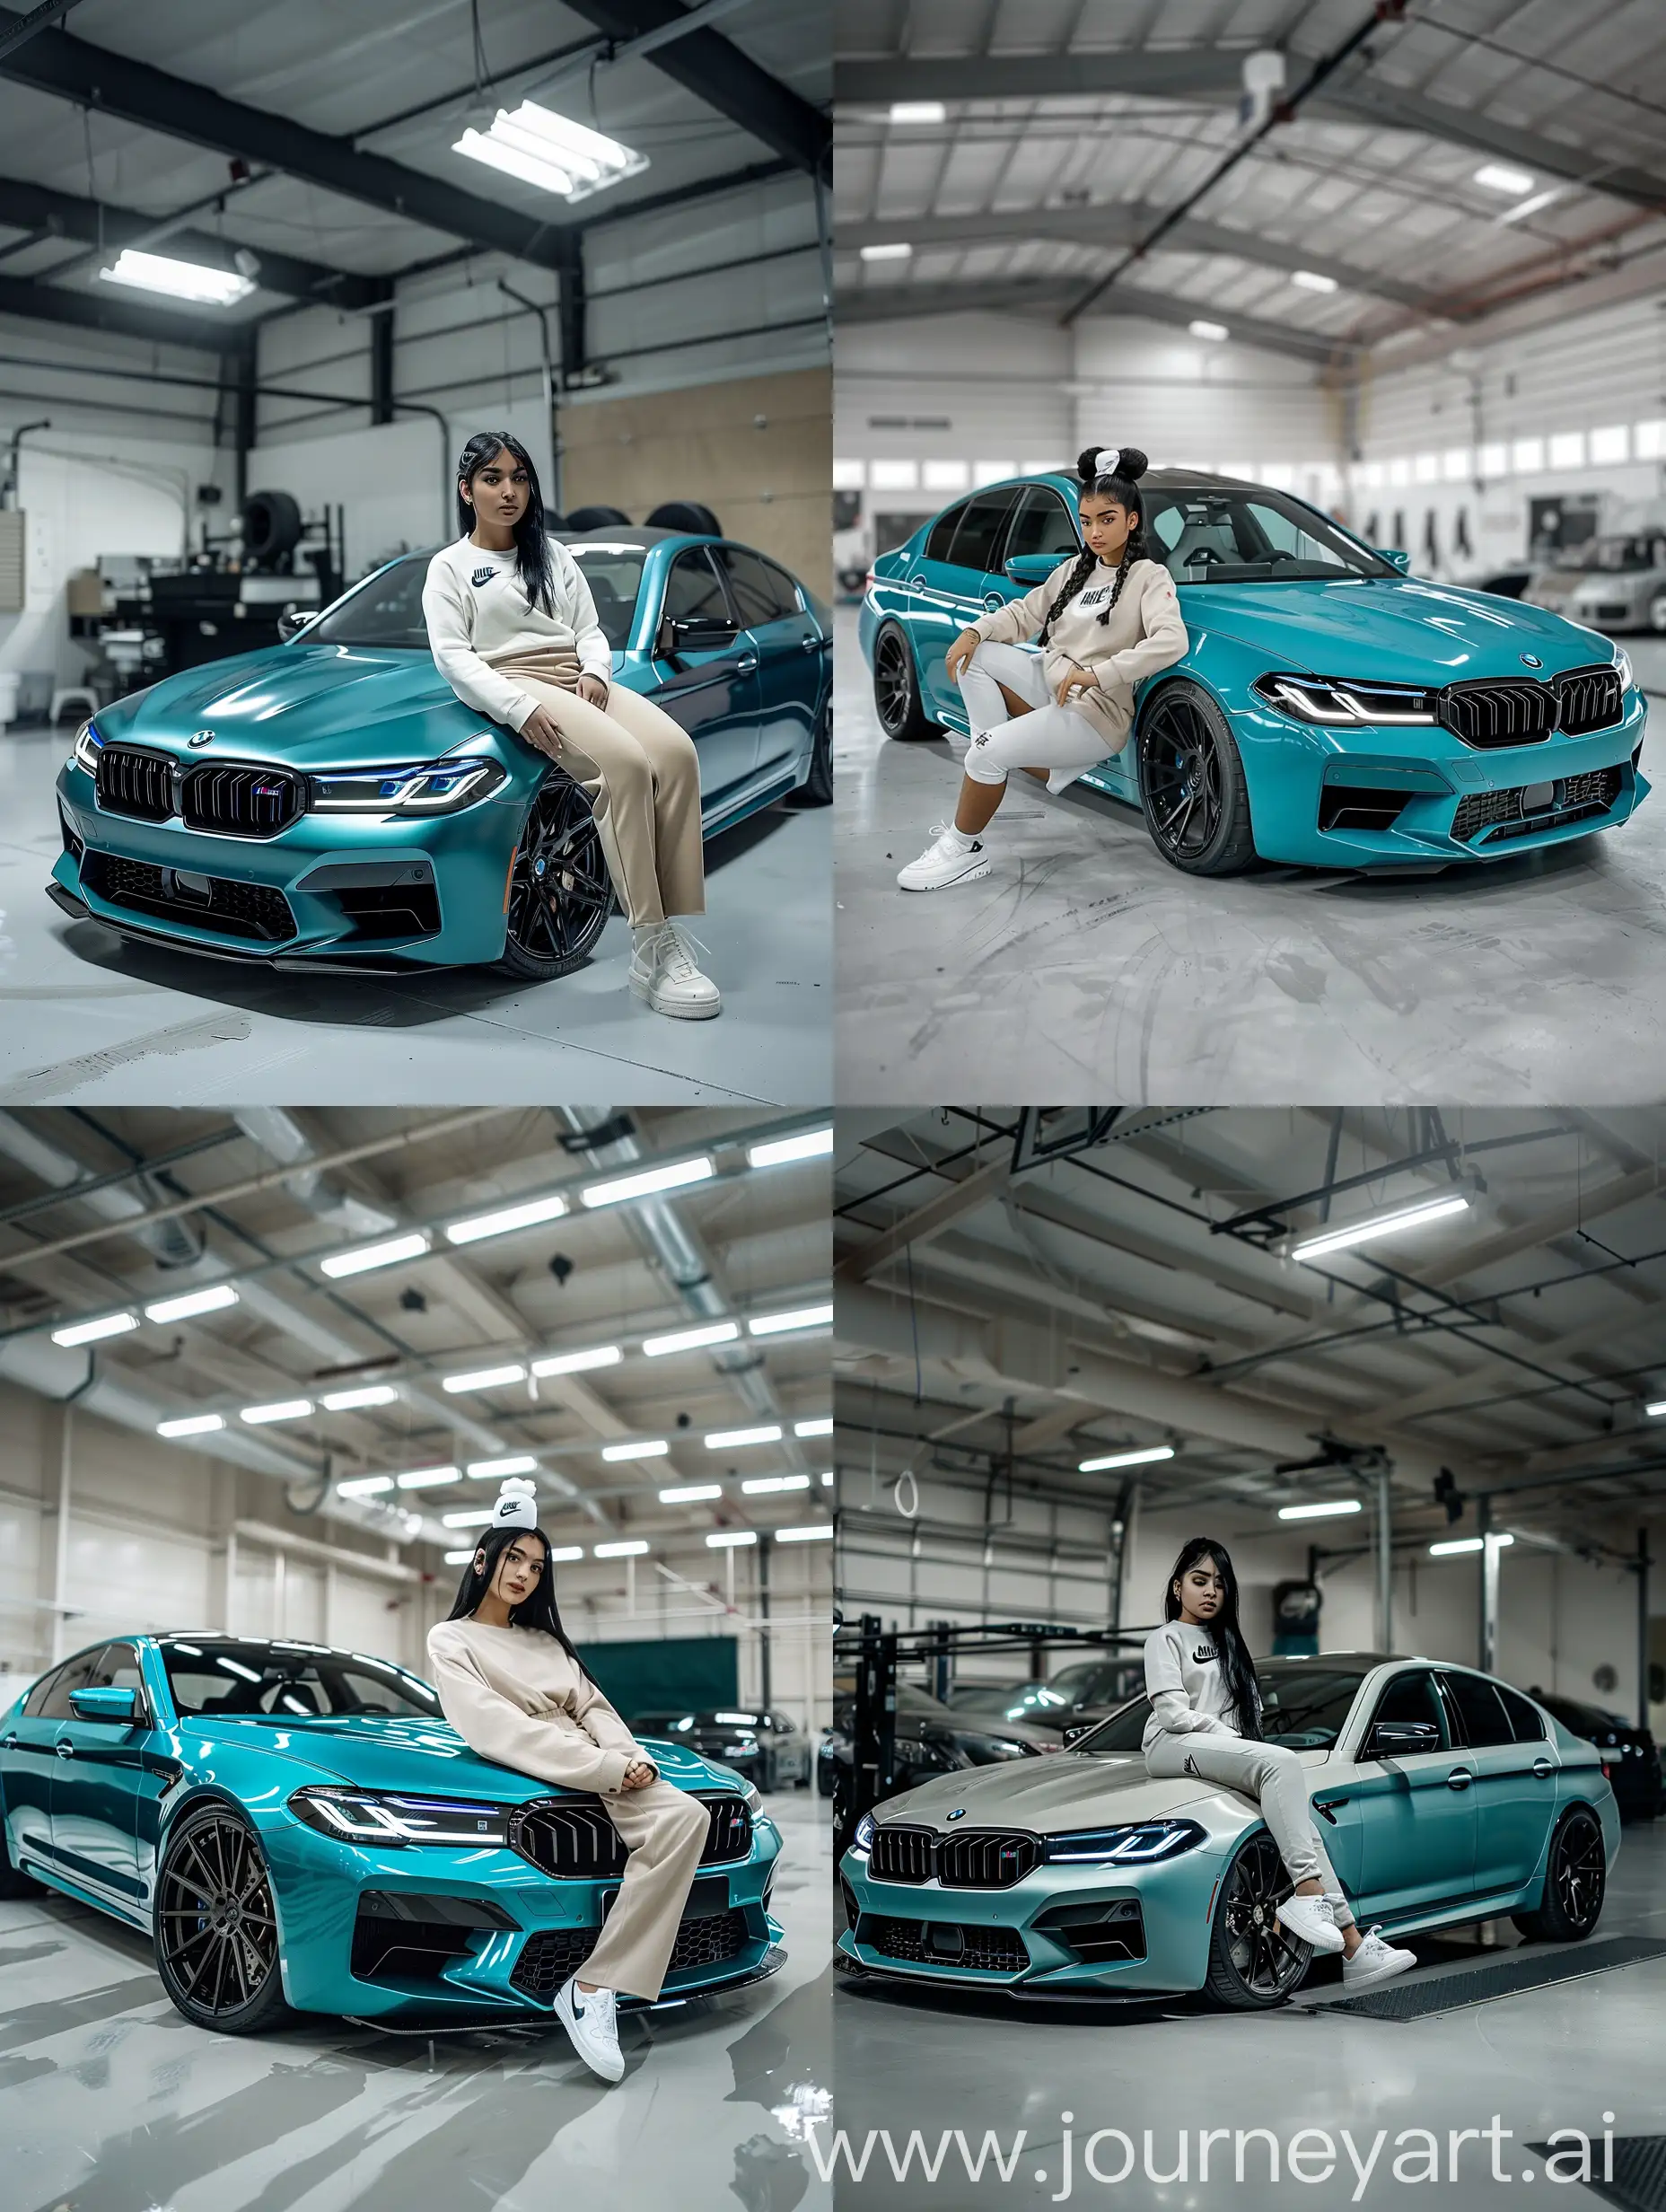 Turkish-Girl-with-Black-Hair-Poses-on-BMW-M5-Facelift-in-Garage